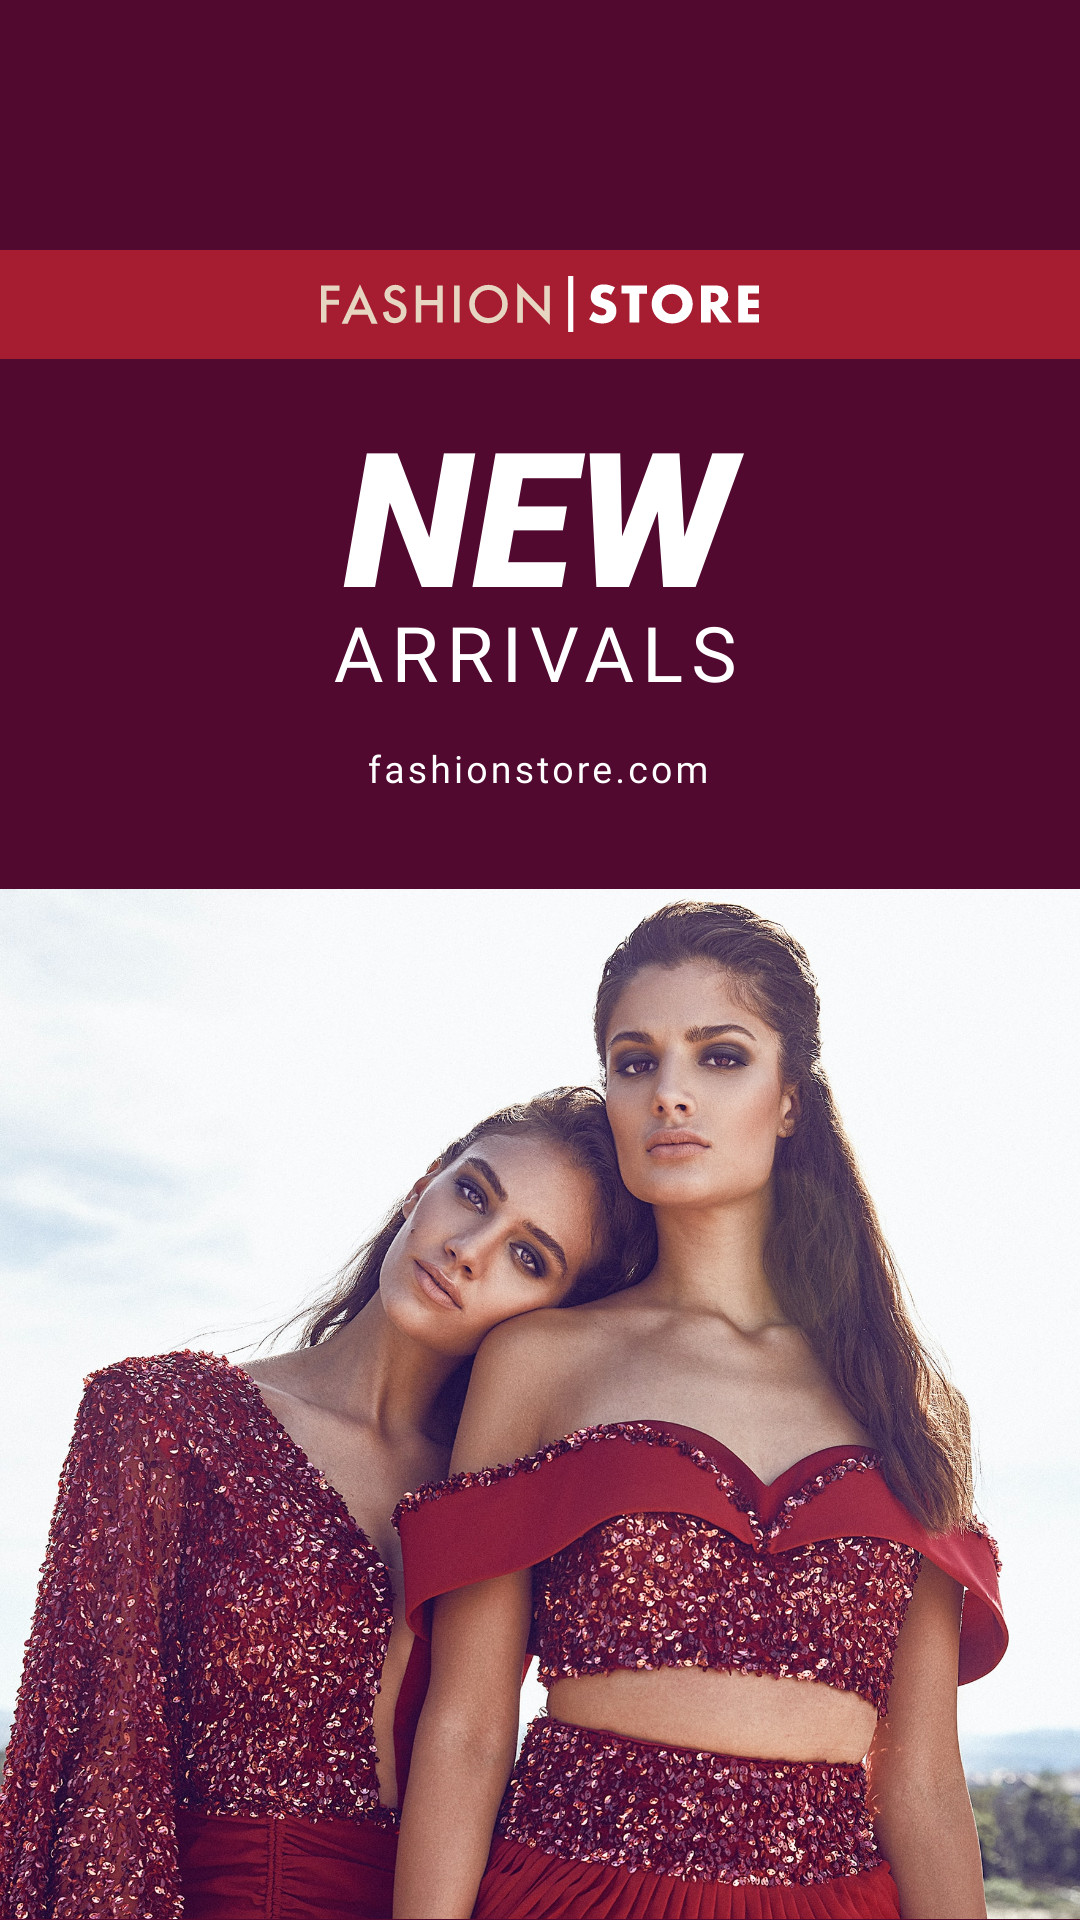 Fashion Store New Arrivals